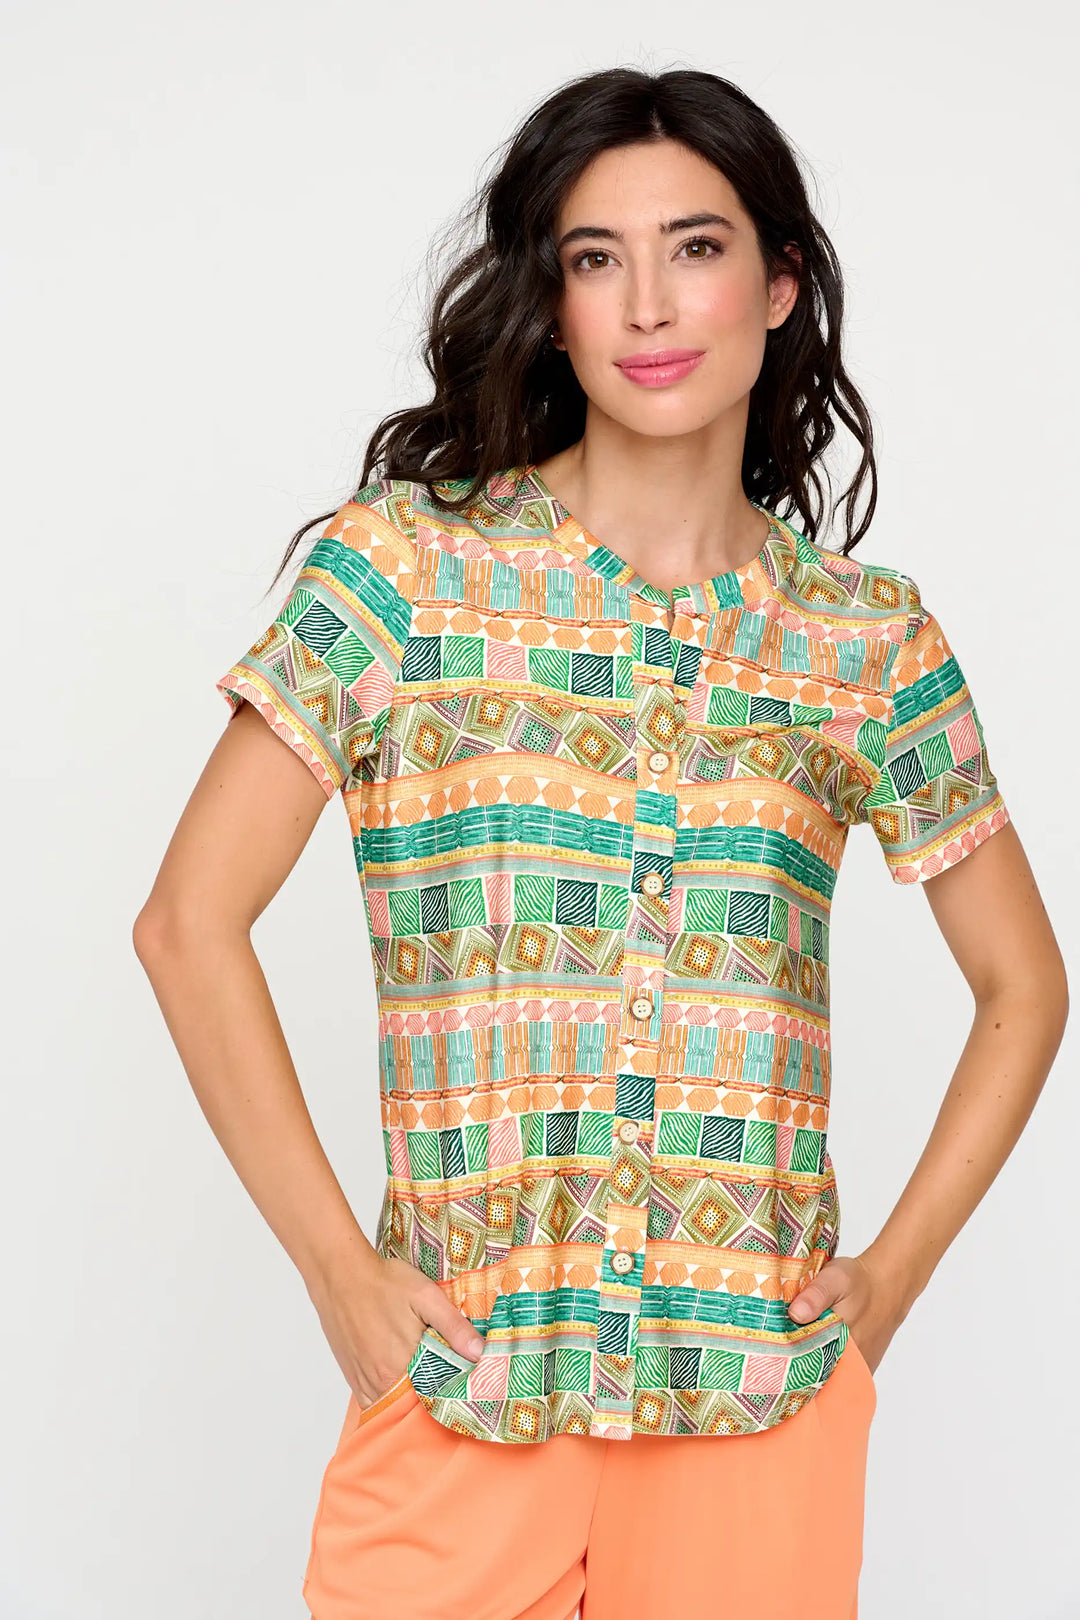 Model wearing the 'Bluma' style blouse, featuring a geometric art deco-inspired pattern in apricot and mint green, with short sleeves and a buttoned front, complemented by peach-coloured trousers.